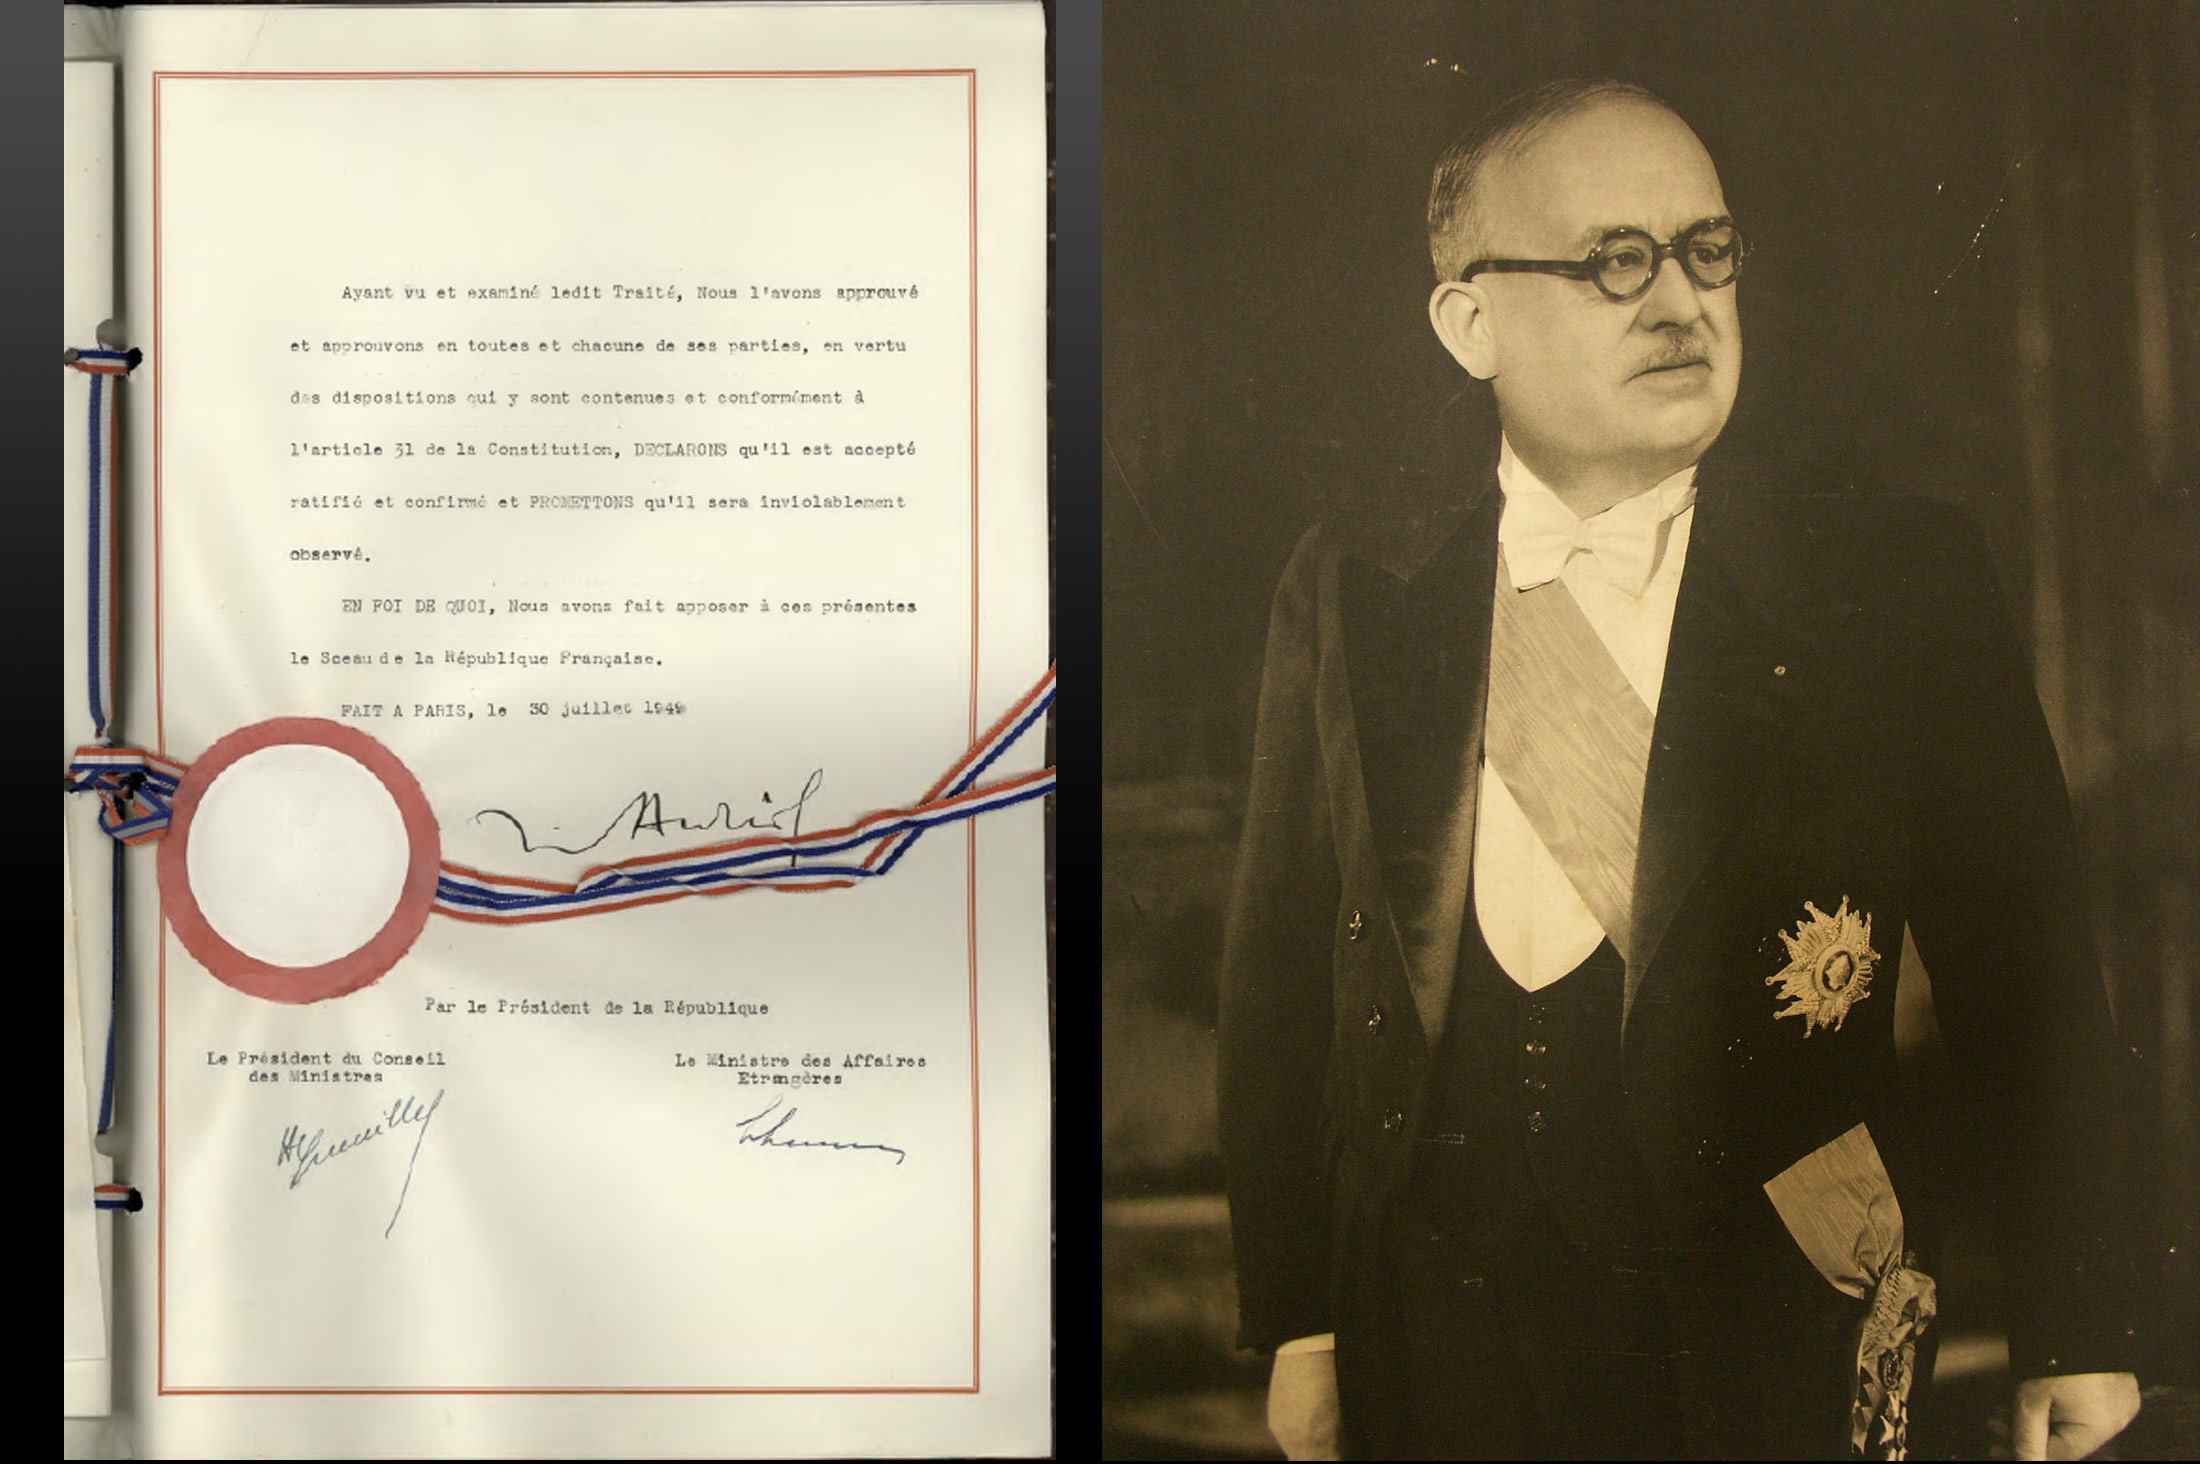 PARIS, 30 JULY 1949, THE PRESIDENT OF THE FRENCH REPUBLIC, VINCENT AURIOL, SIGNS THE INSTRUMENT OF ACCESSION FOR FRANCE